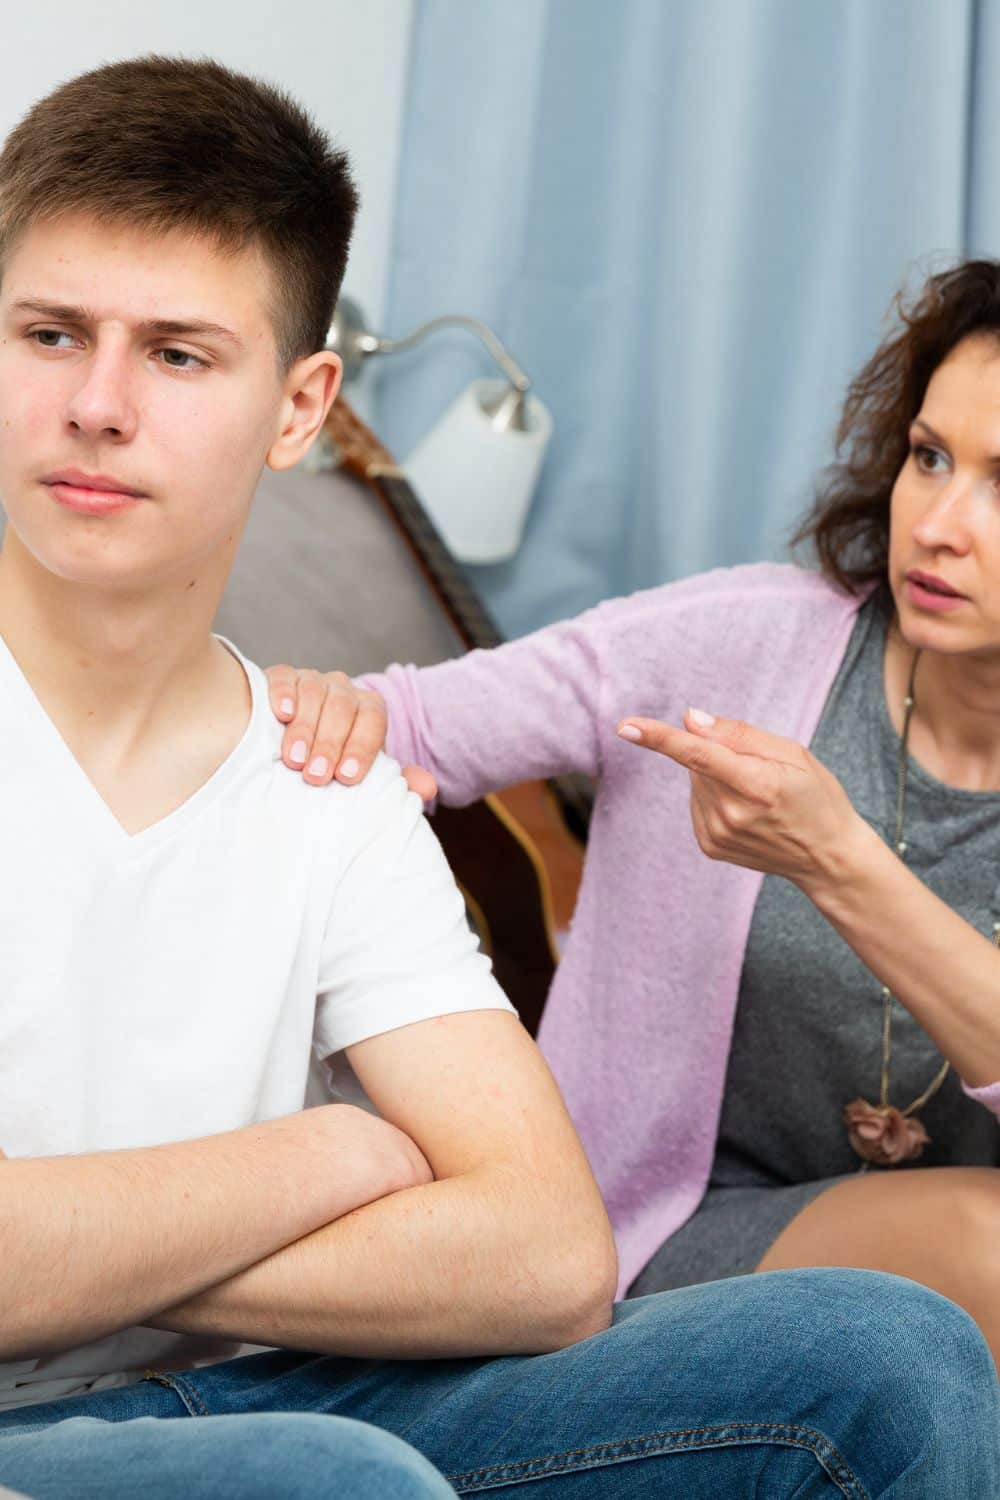 Tips for Parents Tips to Help Your Teen Combat Different Addictions